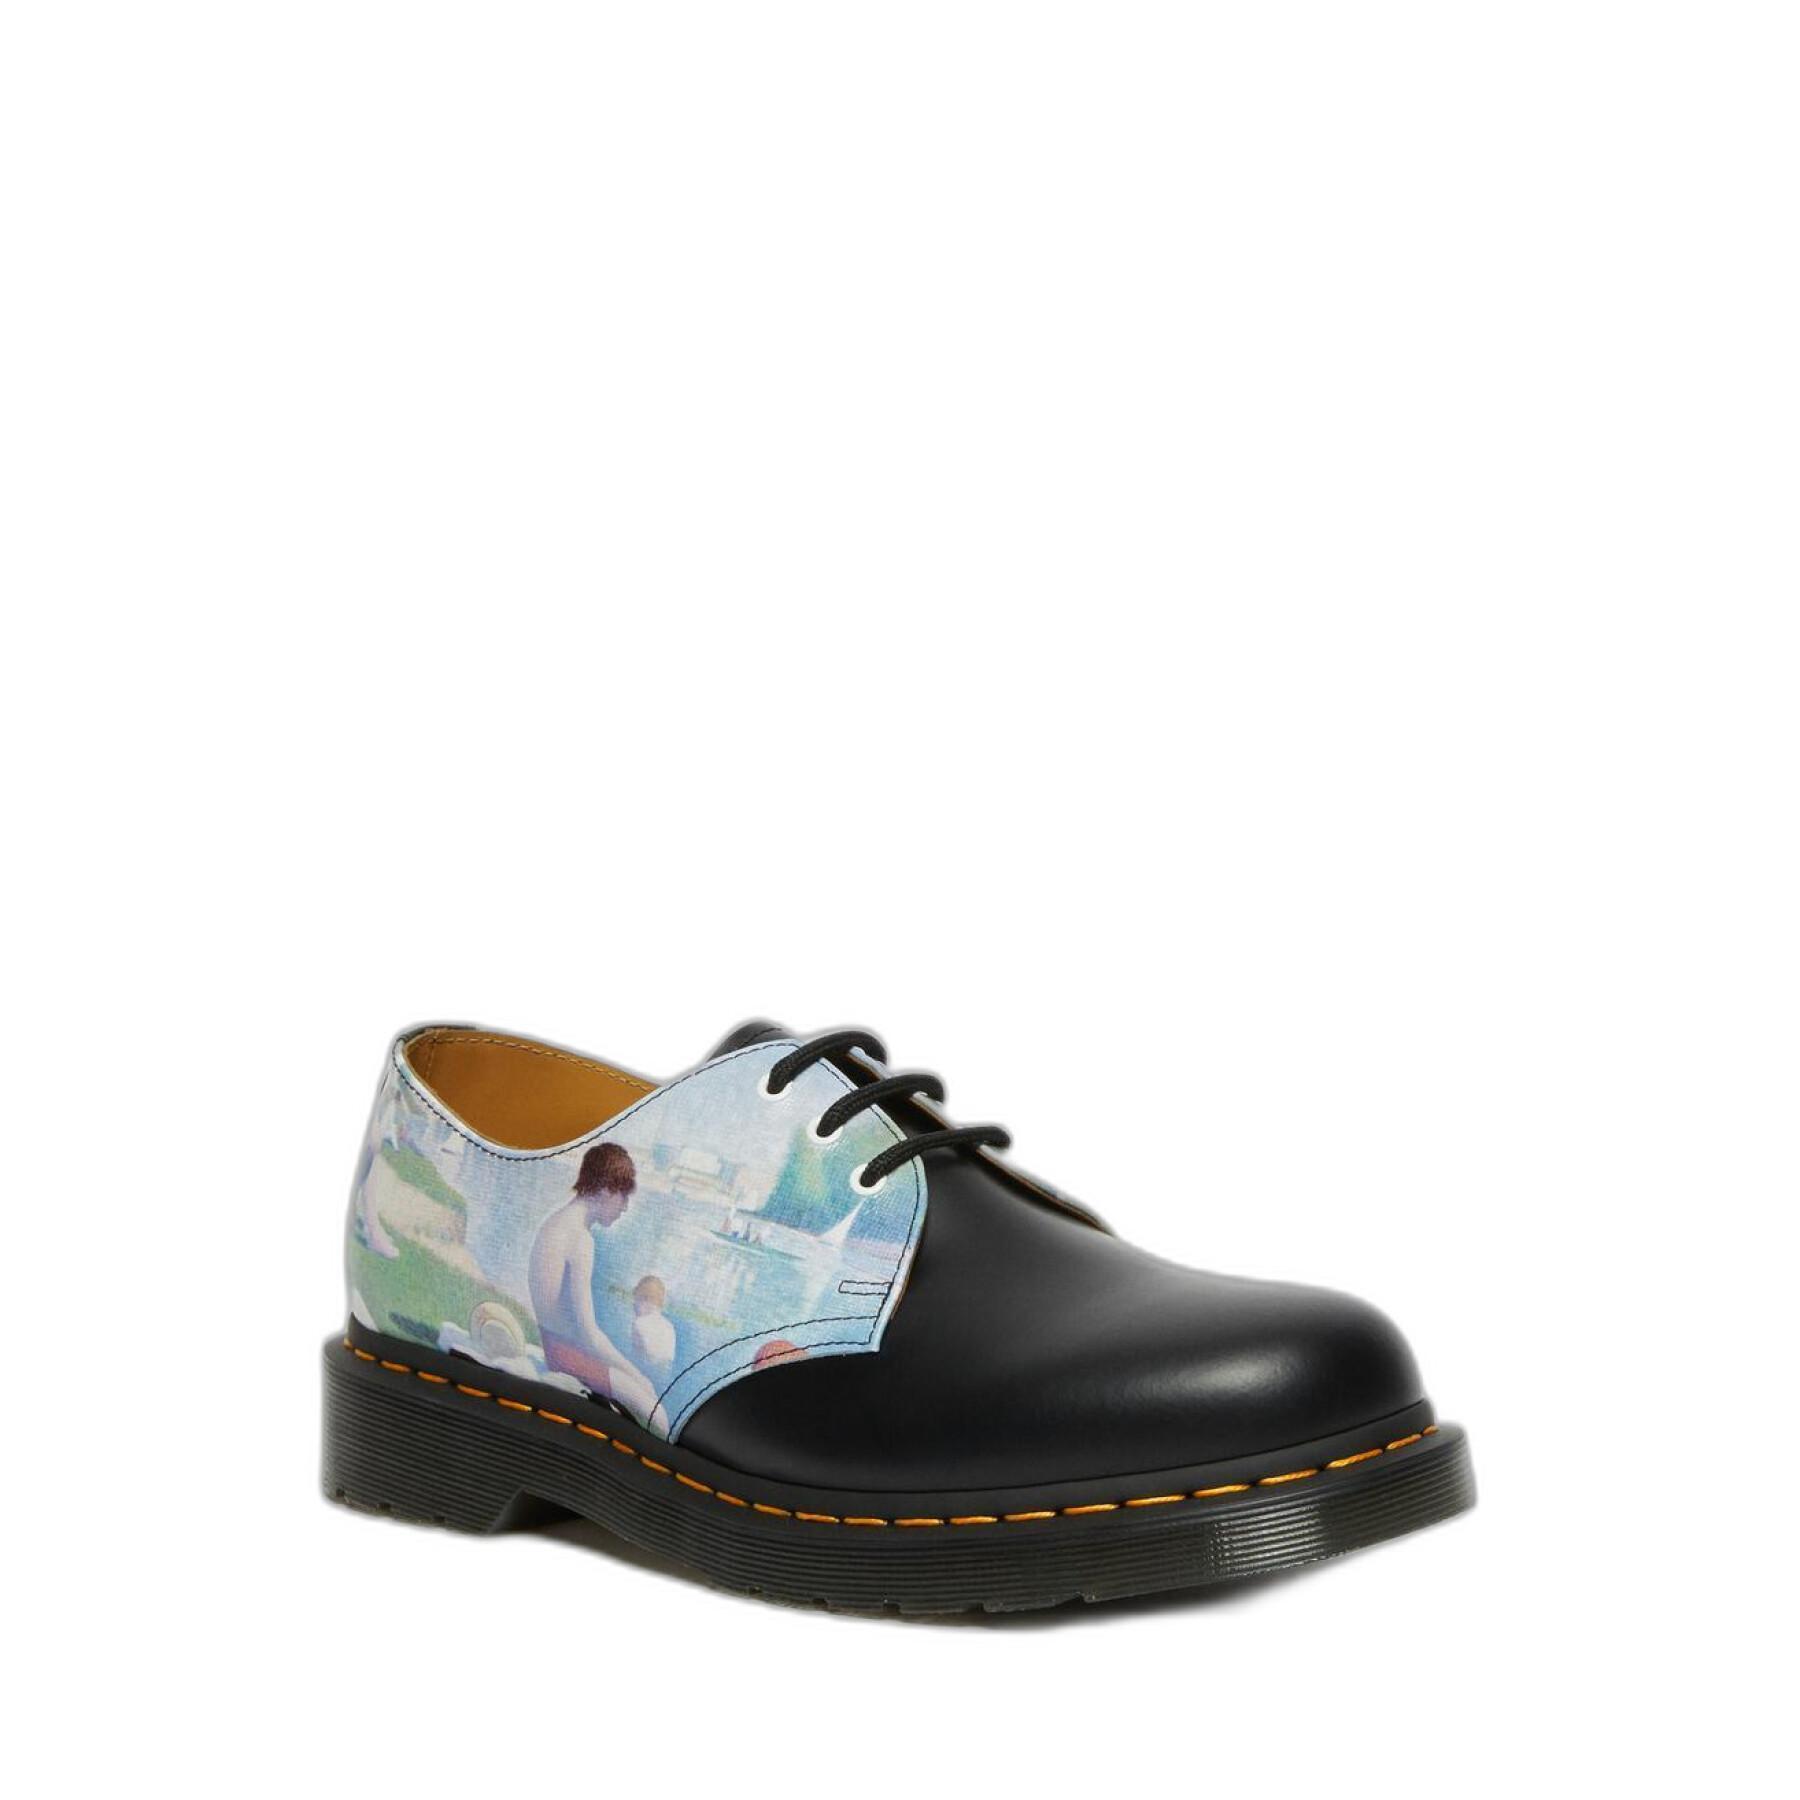 Derbie Dr Martens 1461 x The National Gallery Bathers